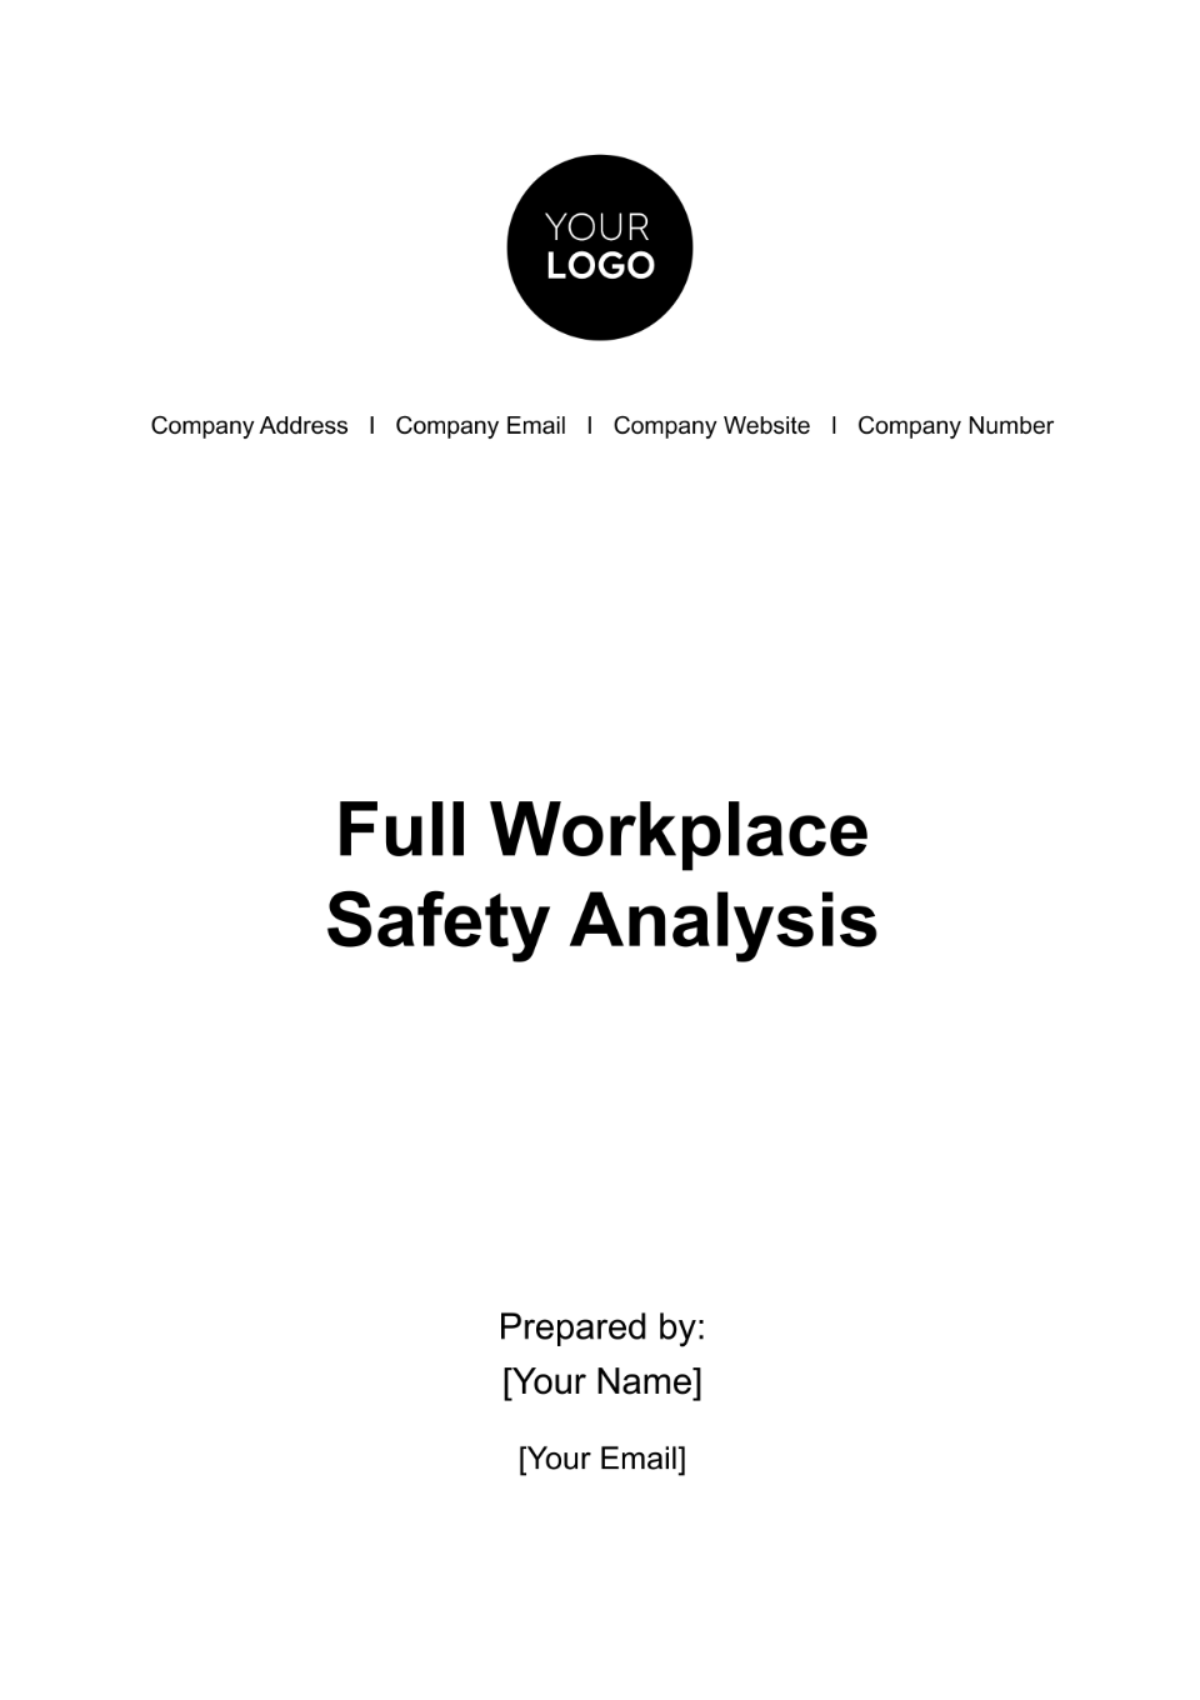 Full Workplace Safety Analysis HR Template